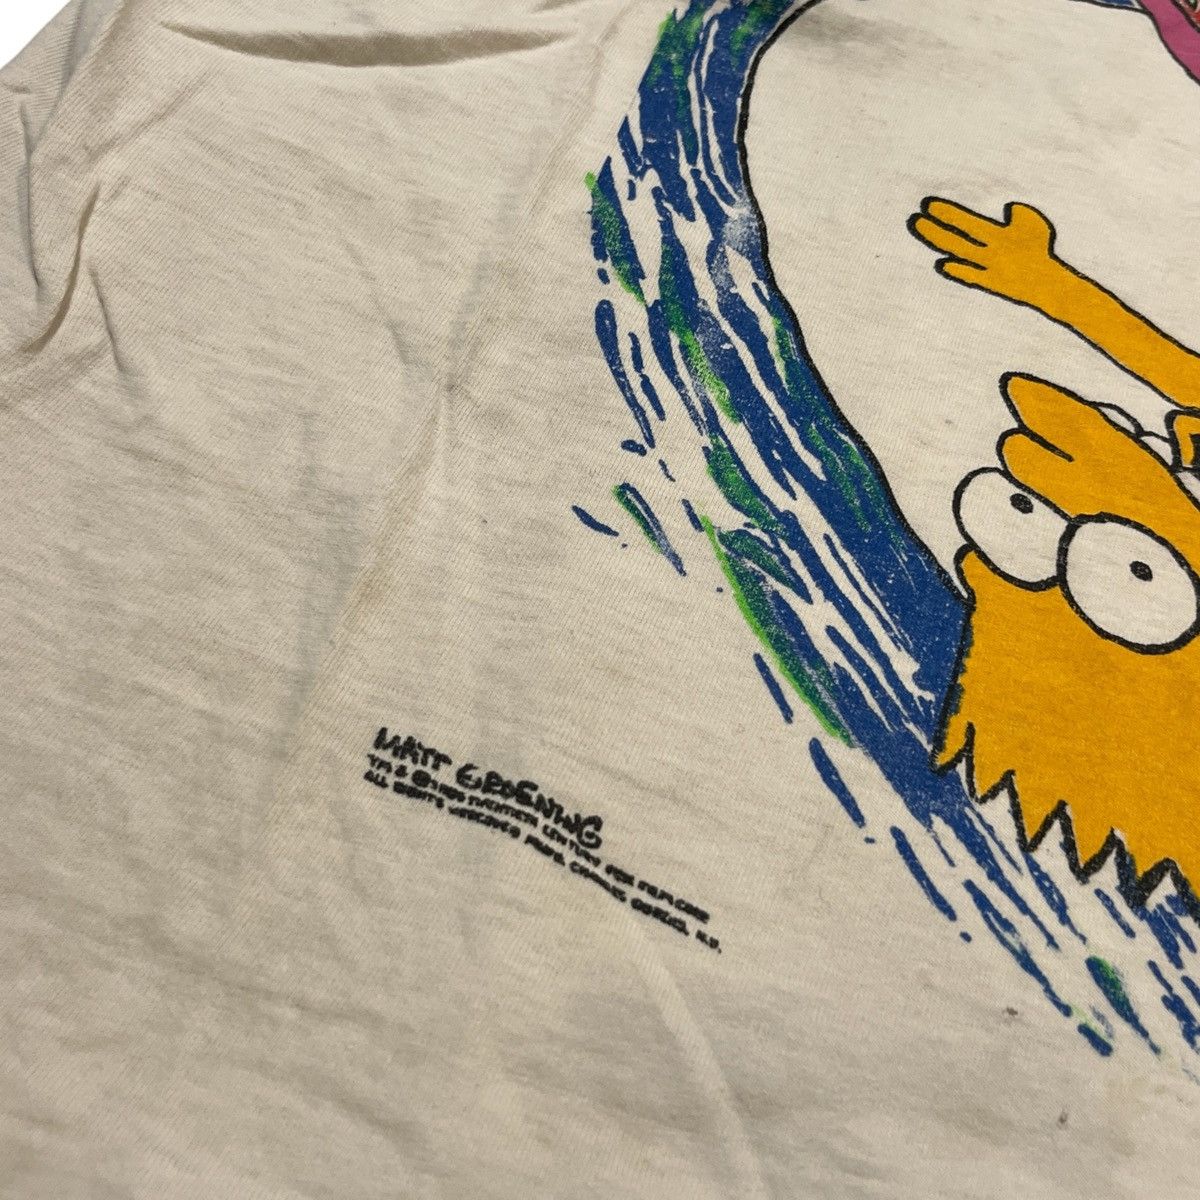 Vintage 90s The Simpsons Bart Surfing Tee Size US L / EU 52-54 / 3 - 3 Thumbnail